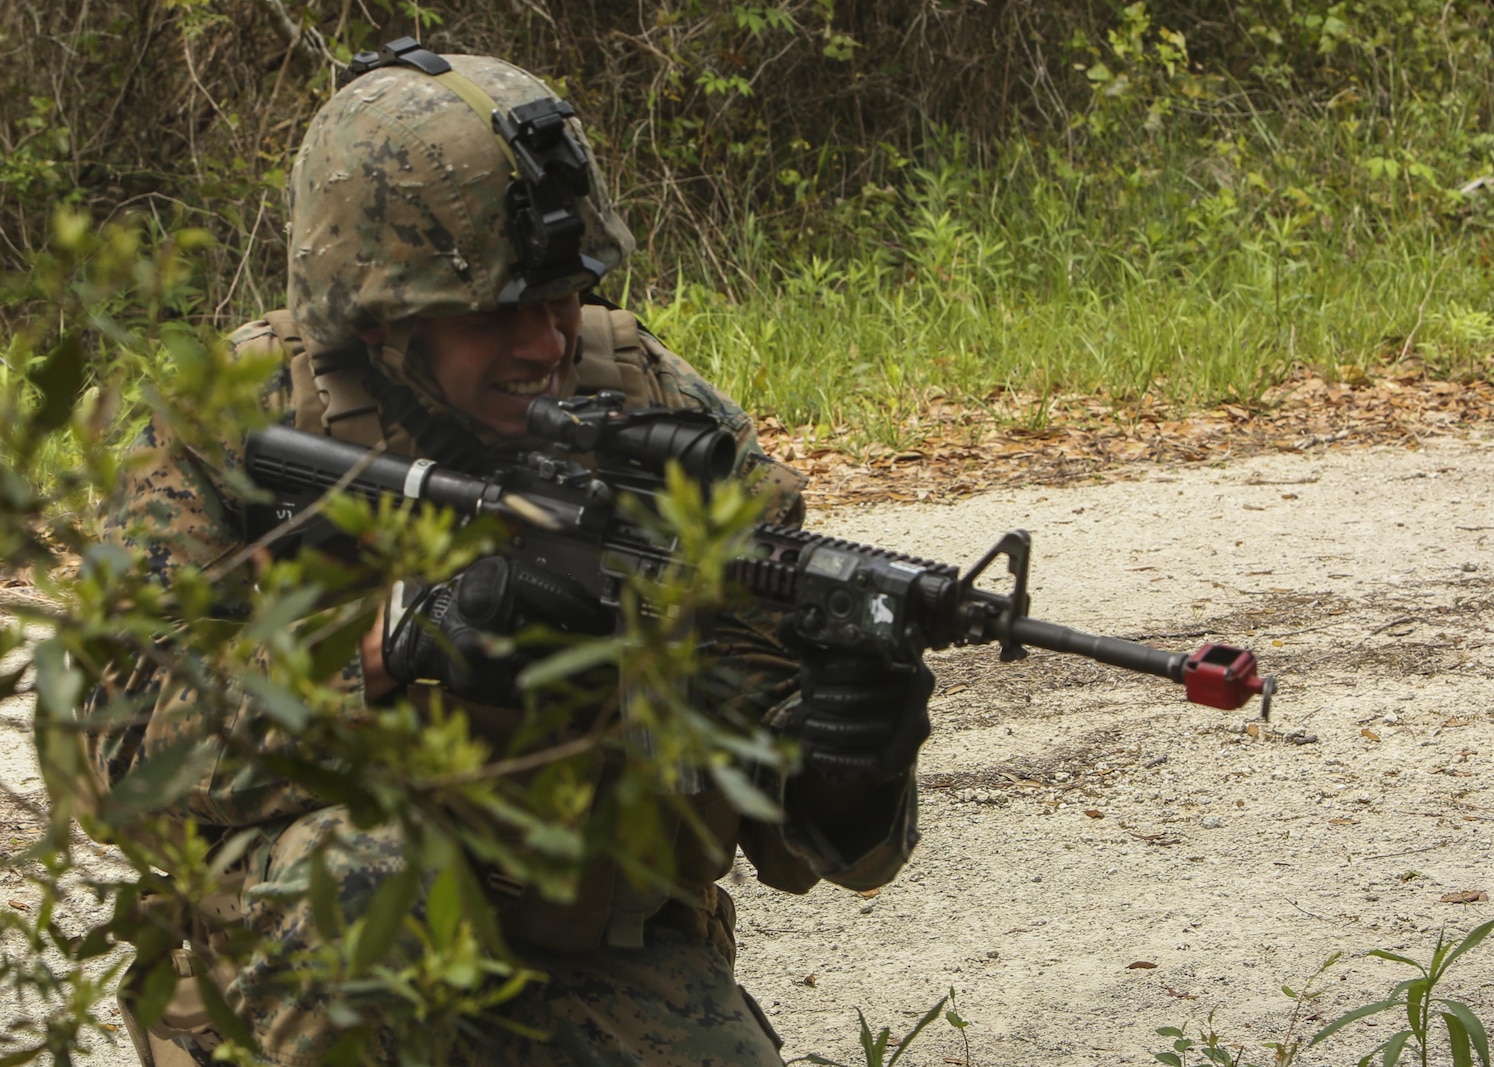 Capt. Daniel Mora, a military police officer with 1st Platoon, Bravo Company, 2nd Law Enforcement Battalion, returns fire on simulated enemy combatants during a perimeter security patrol during the II Marine Expeditionary Force Command Post Exercise 3 at Camp Lejeune, N.C., April 20, 2016. During the CPX, 2nd LEB posted security around the campsite and defended it from mock enemies, ensuring the headquarters element could complete the mission safely. (U.S. Marine Corps photo by Cpl. Michelle Reif/Released)